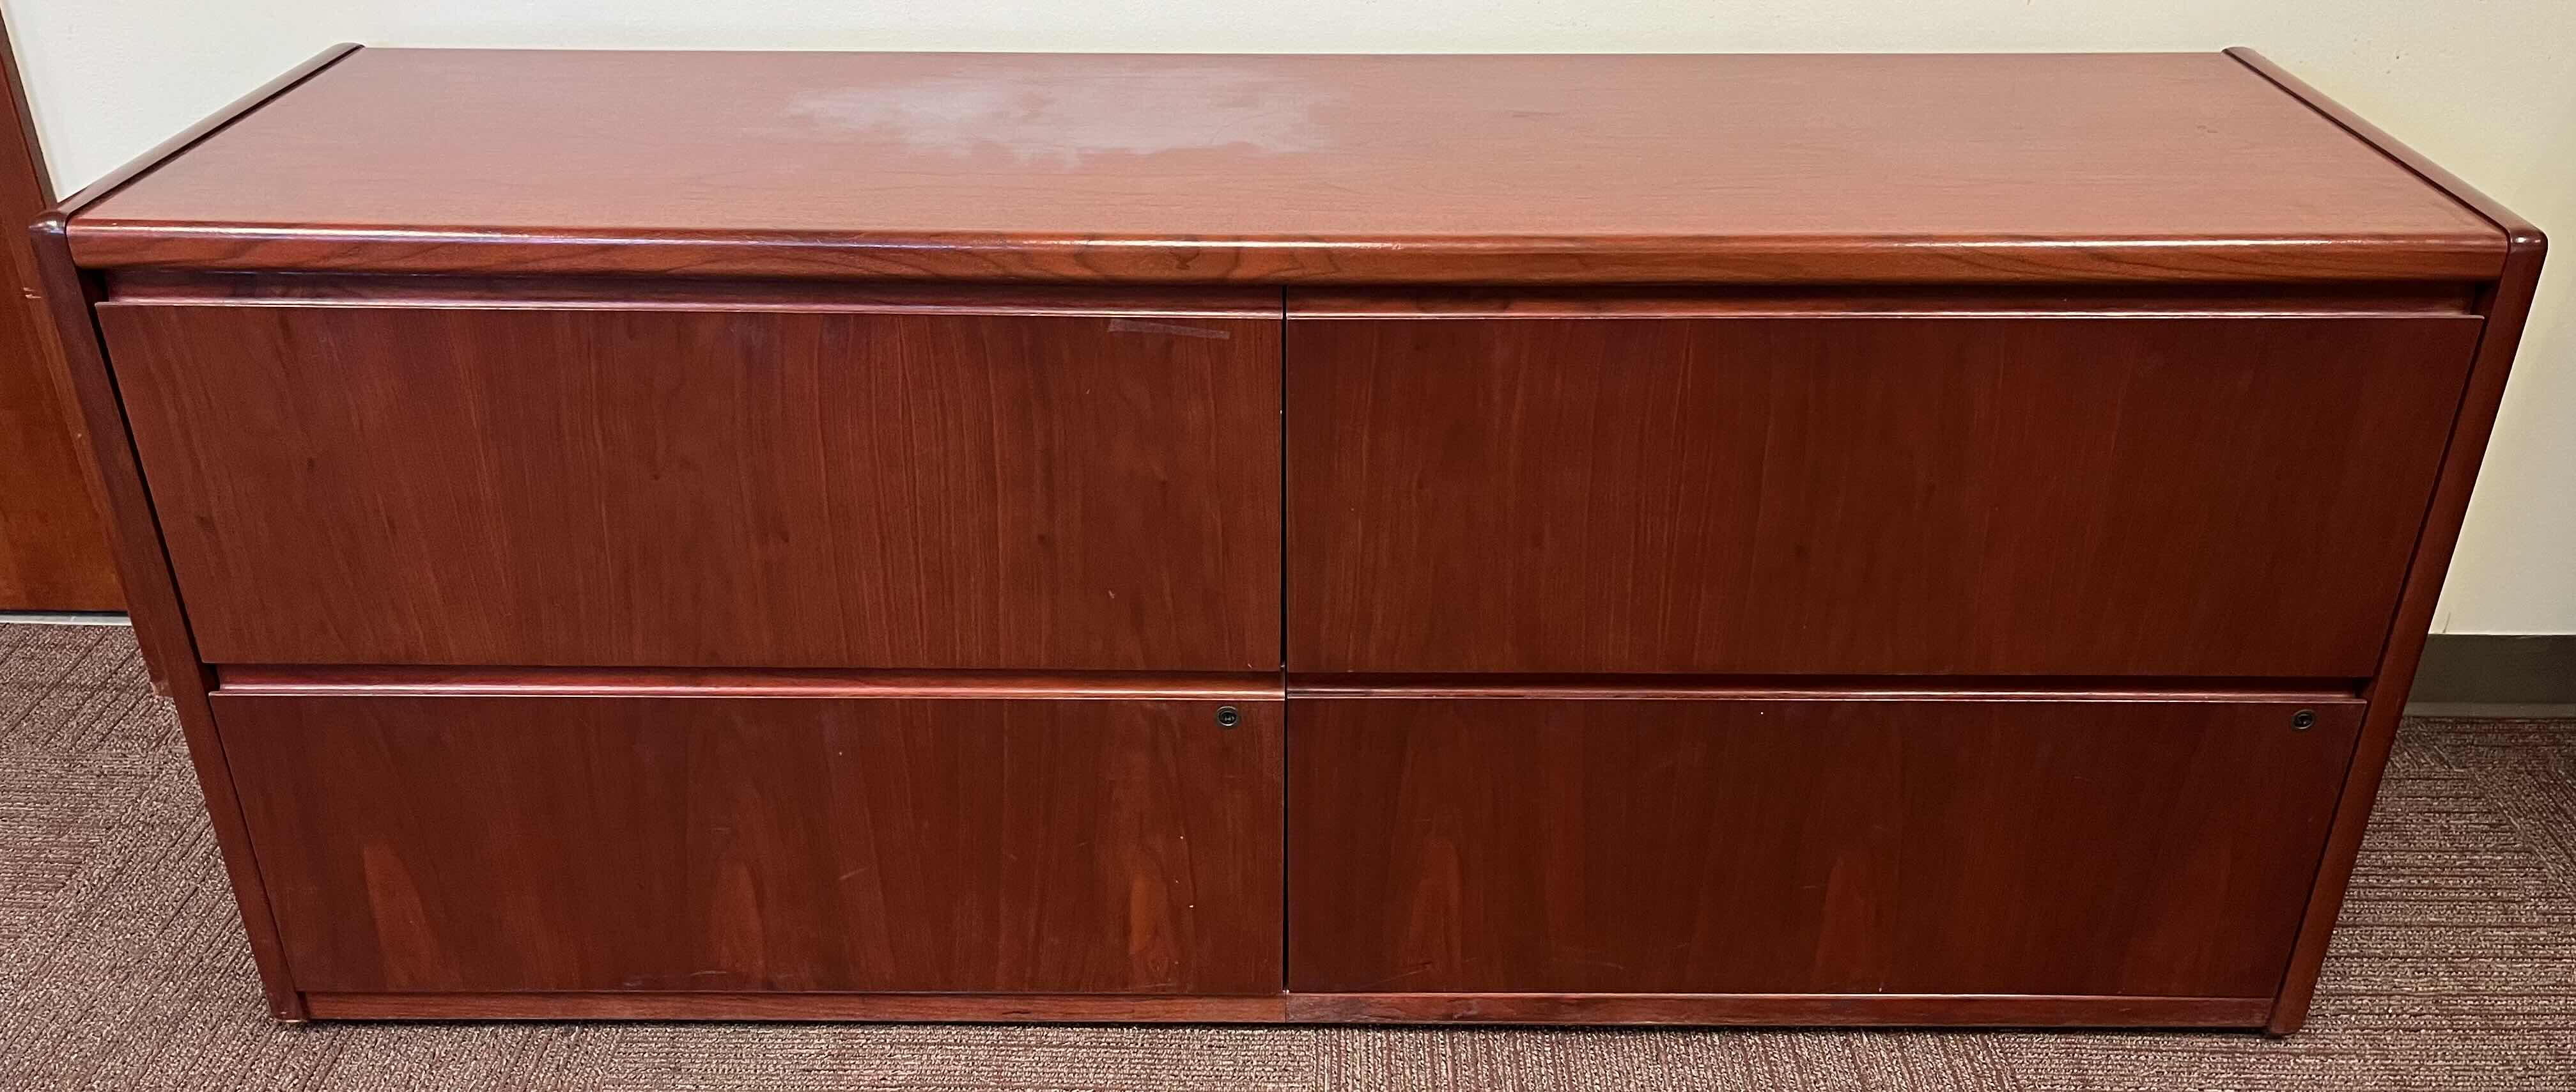 Photo 2 of CHERRY WOOD FINISH LATERAL FILE CABINET 70” X 20” H30”